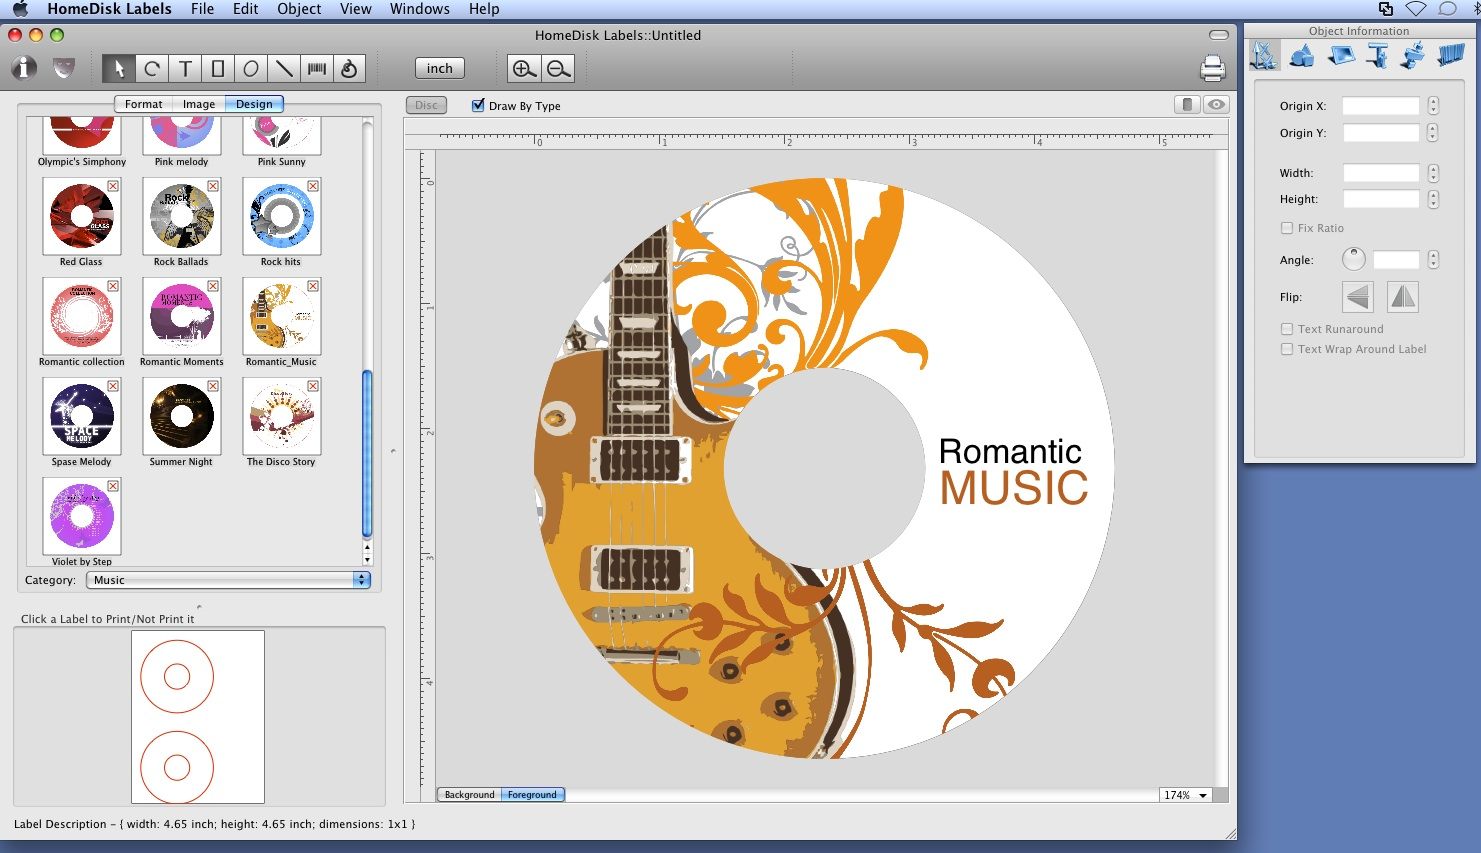 Free Neato Cd Label Software For Mac - potentfestival Within Fellowes Neato Cd Label Template